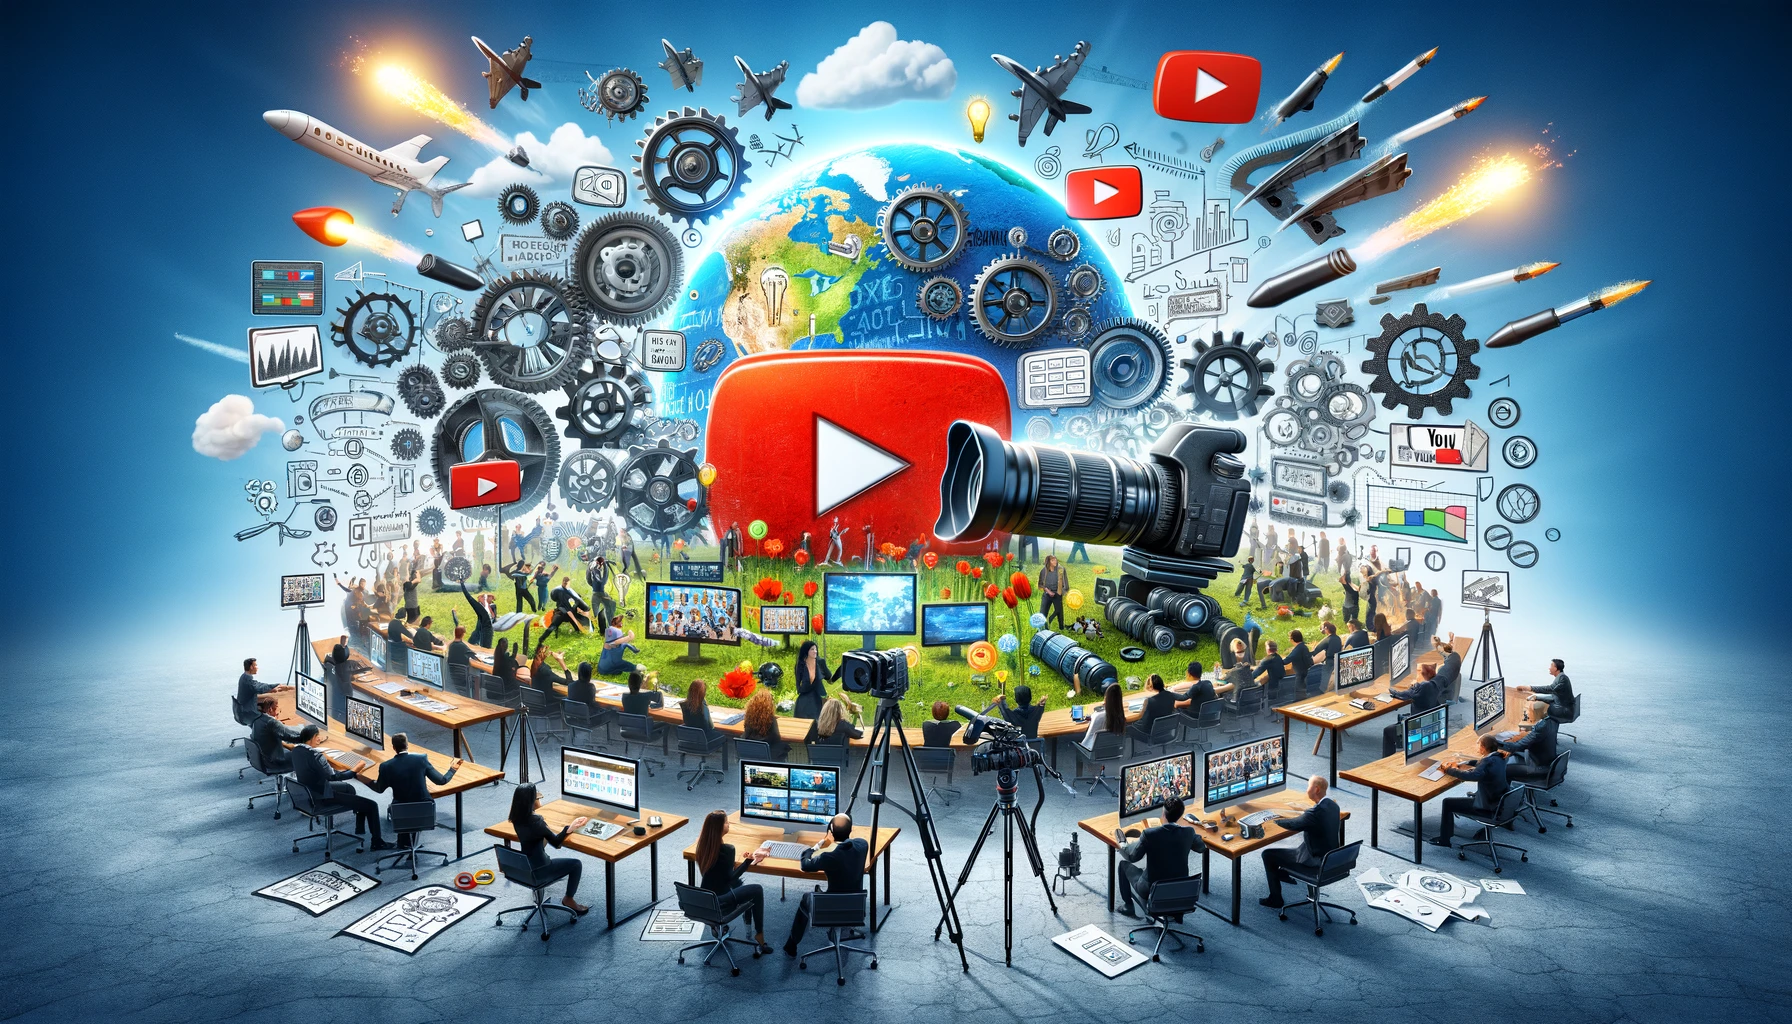 YouTube Video Production: Creating Compelling Content for a Global Audience